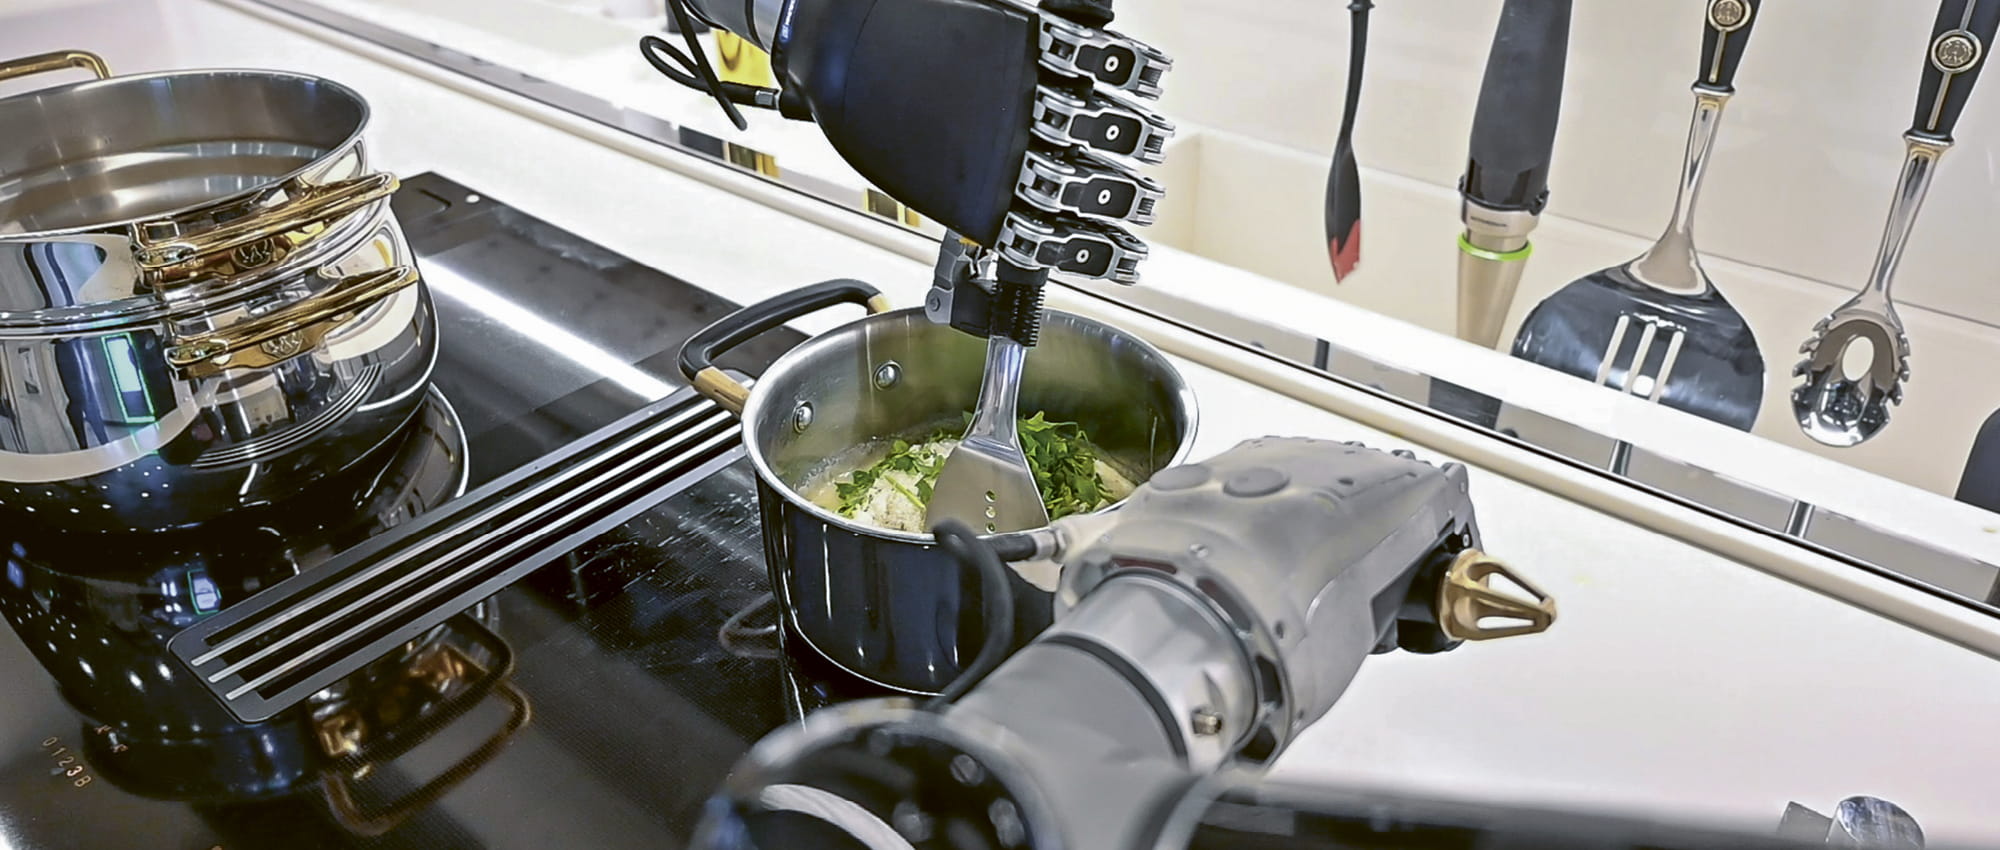 Robotic arms on the stove preparing food in a pot.